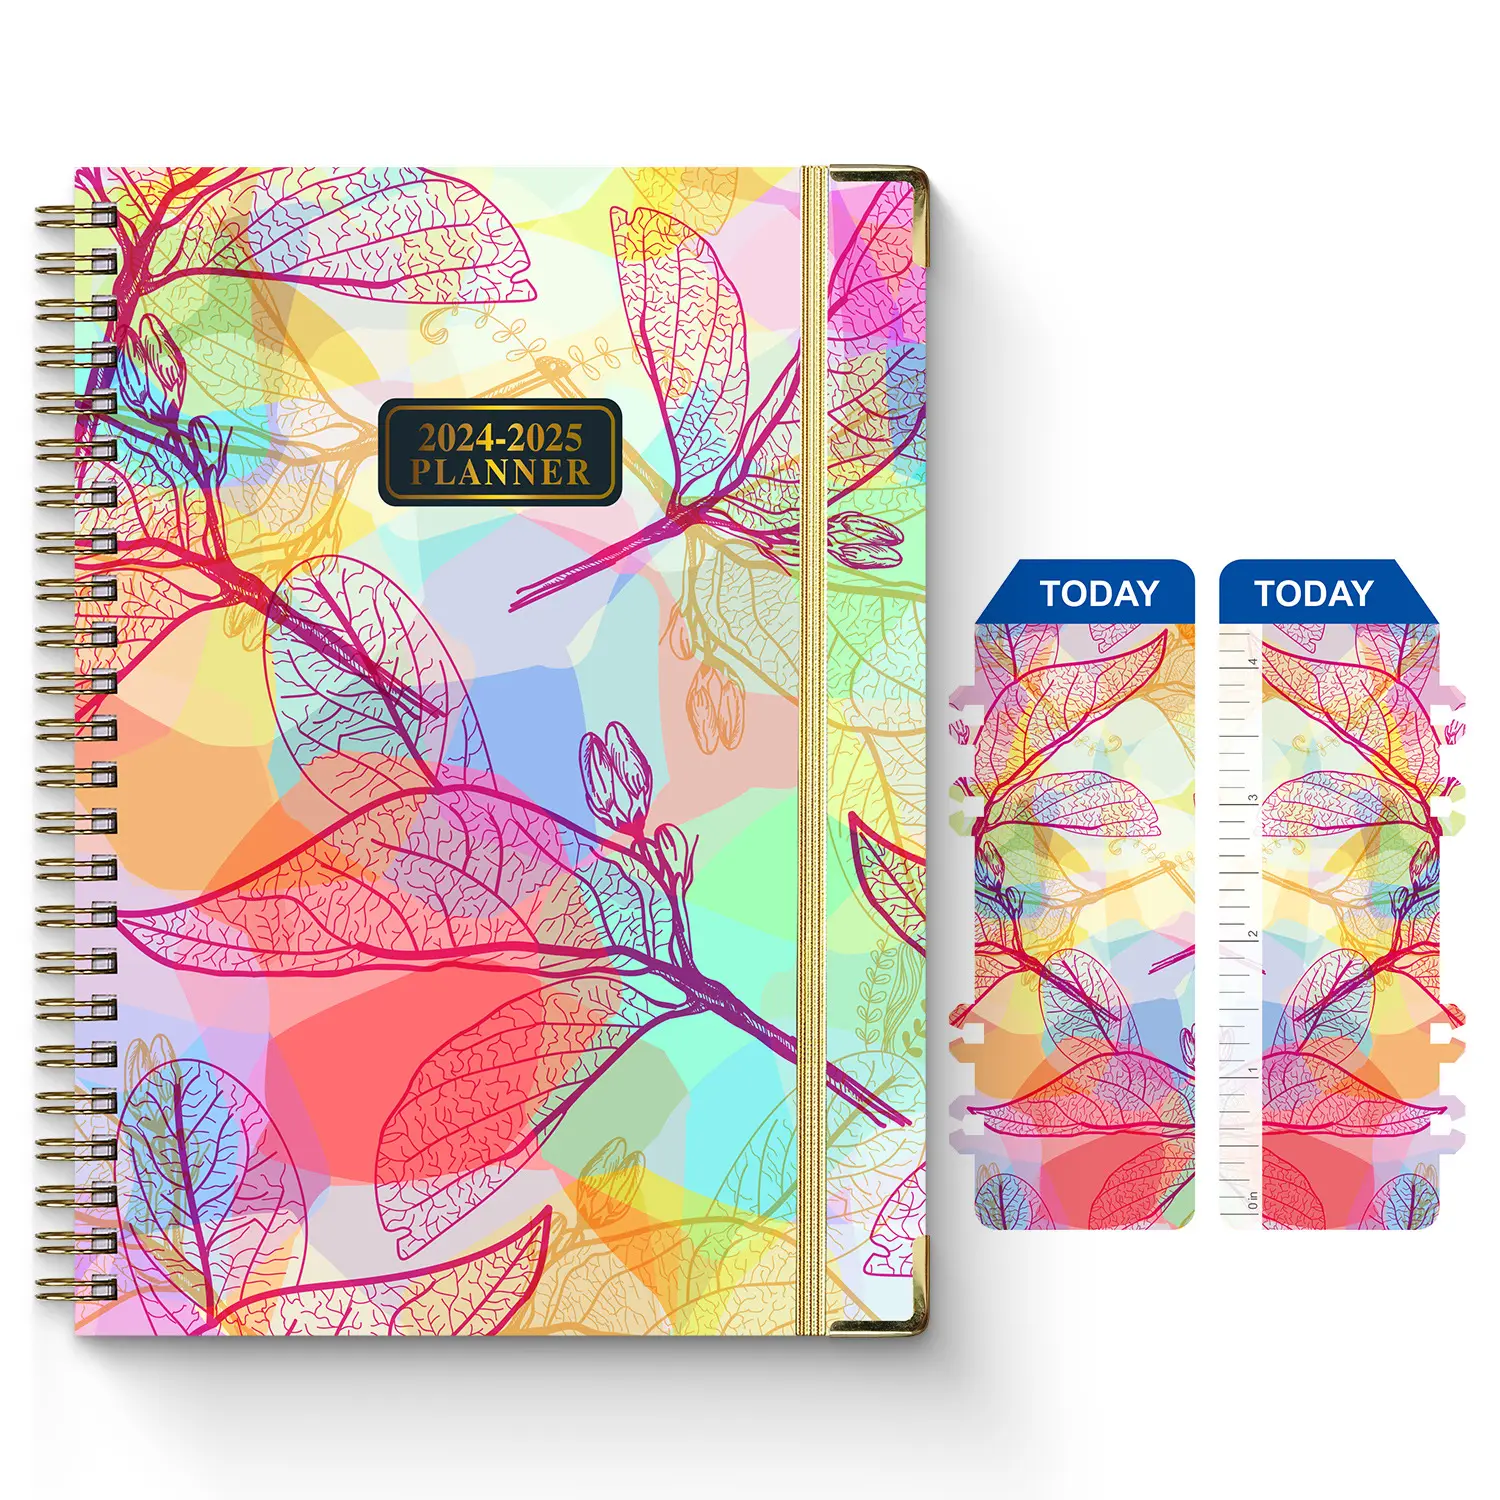 2024 planner spiral bound Weekly   Monthly Jan 2024 - Dec 2024schedule book planner daily Hardcover Monthly Tabs Pocket bandage